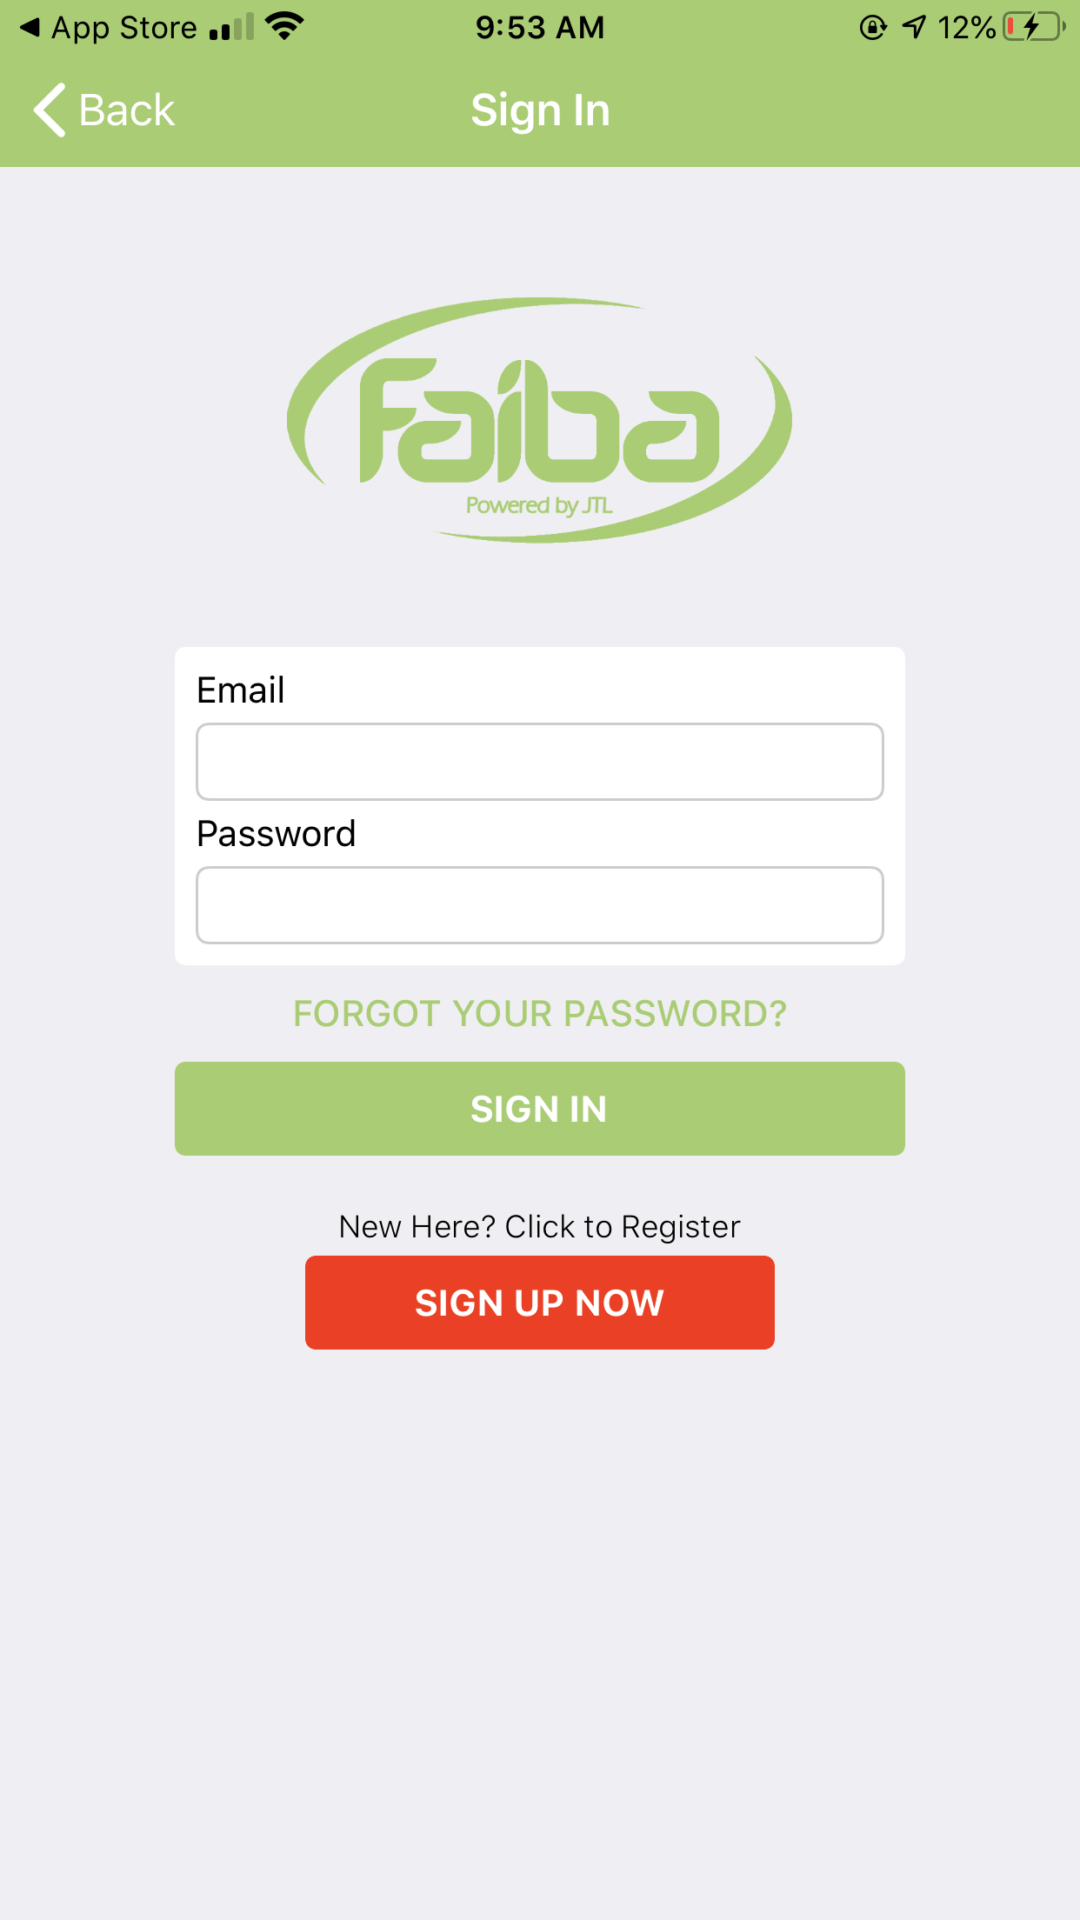 Sign In or Create Account